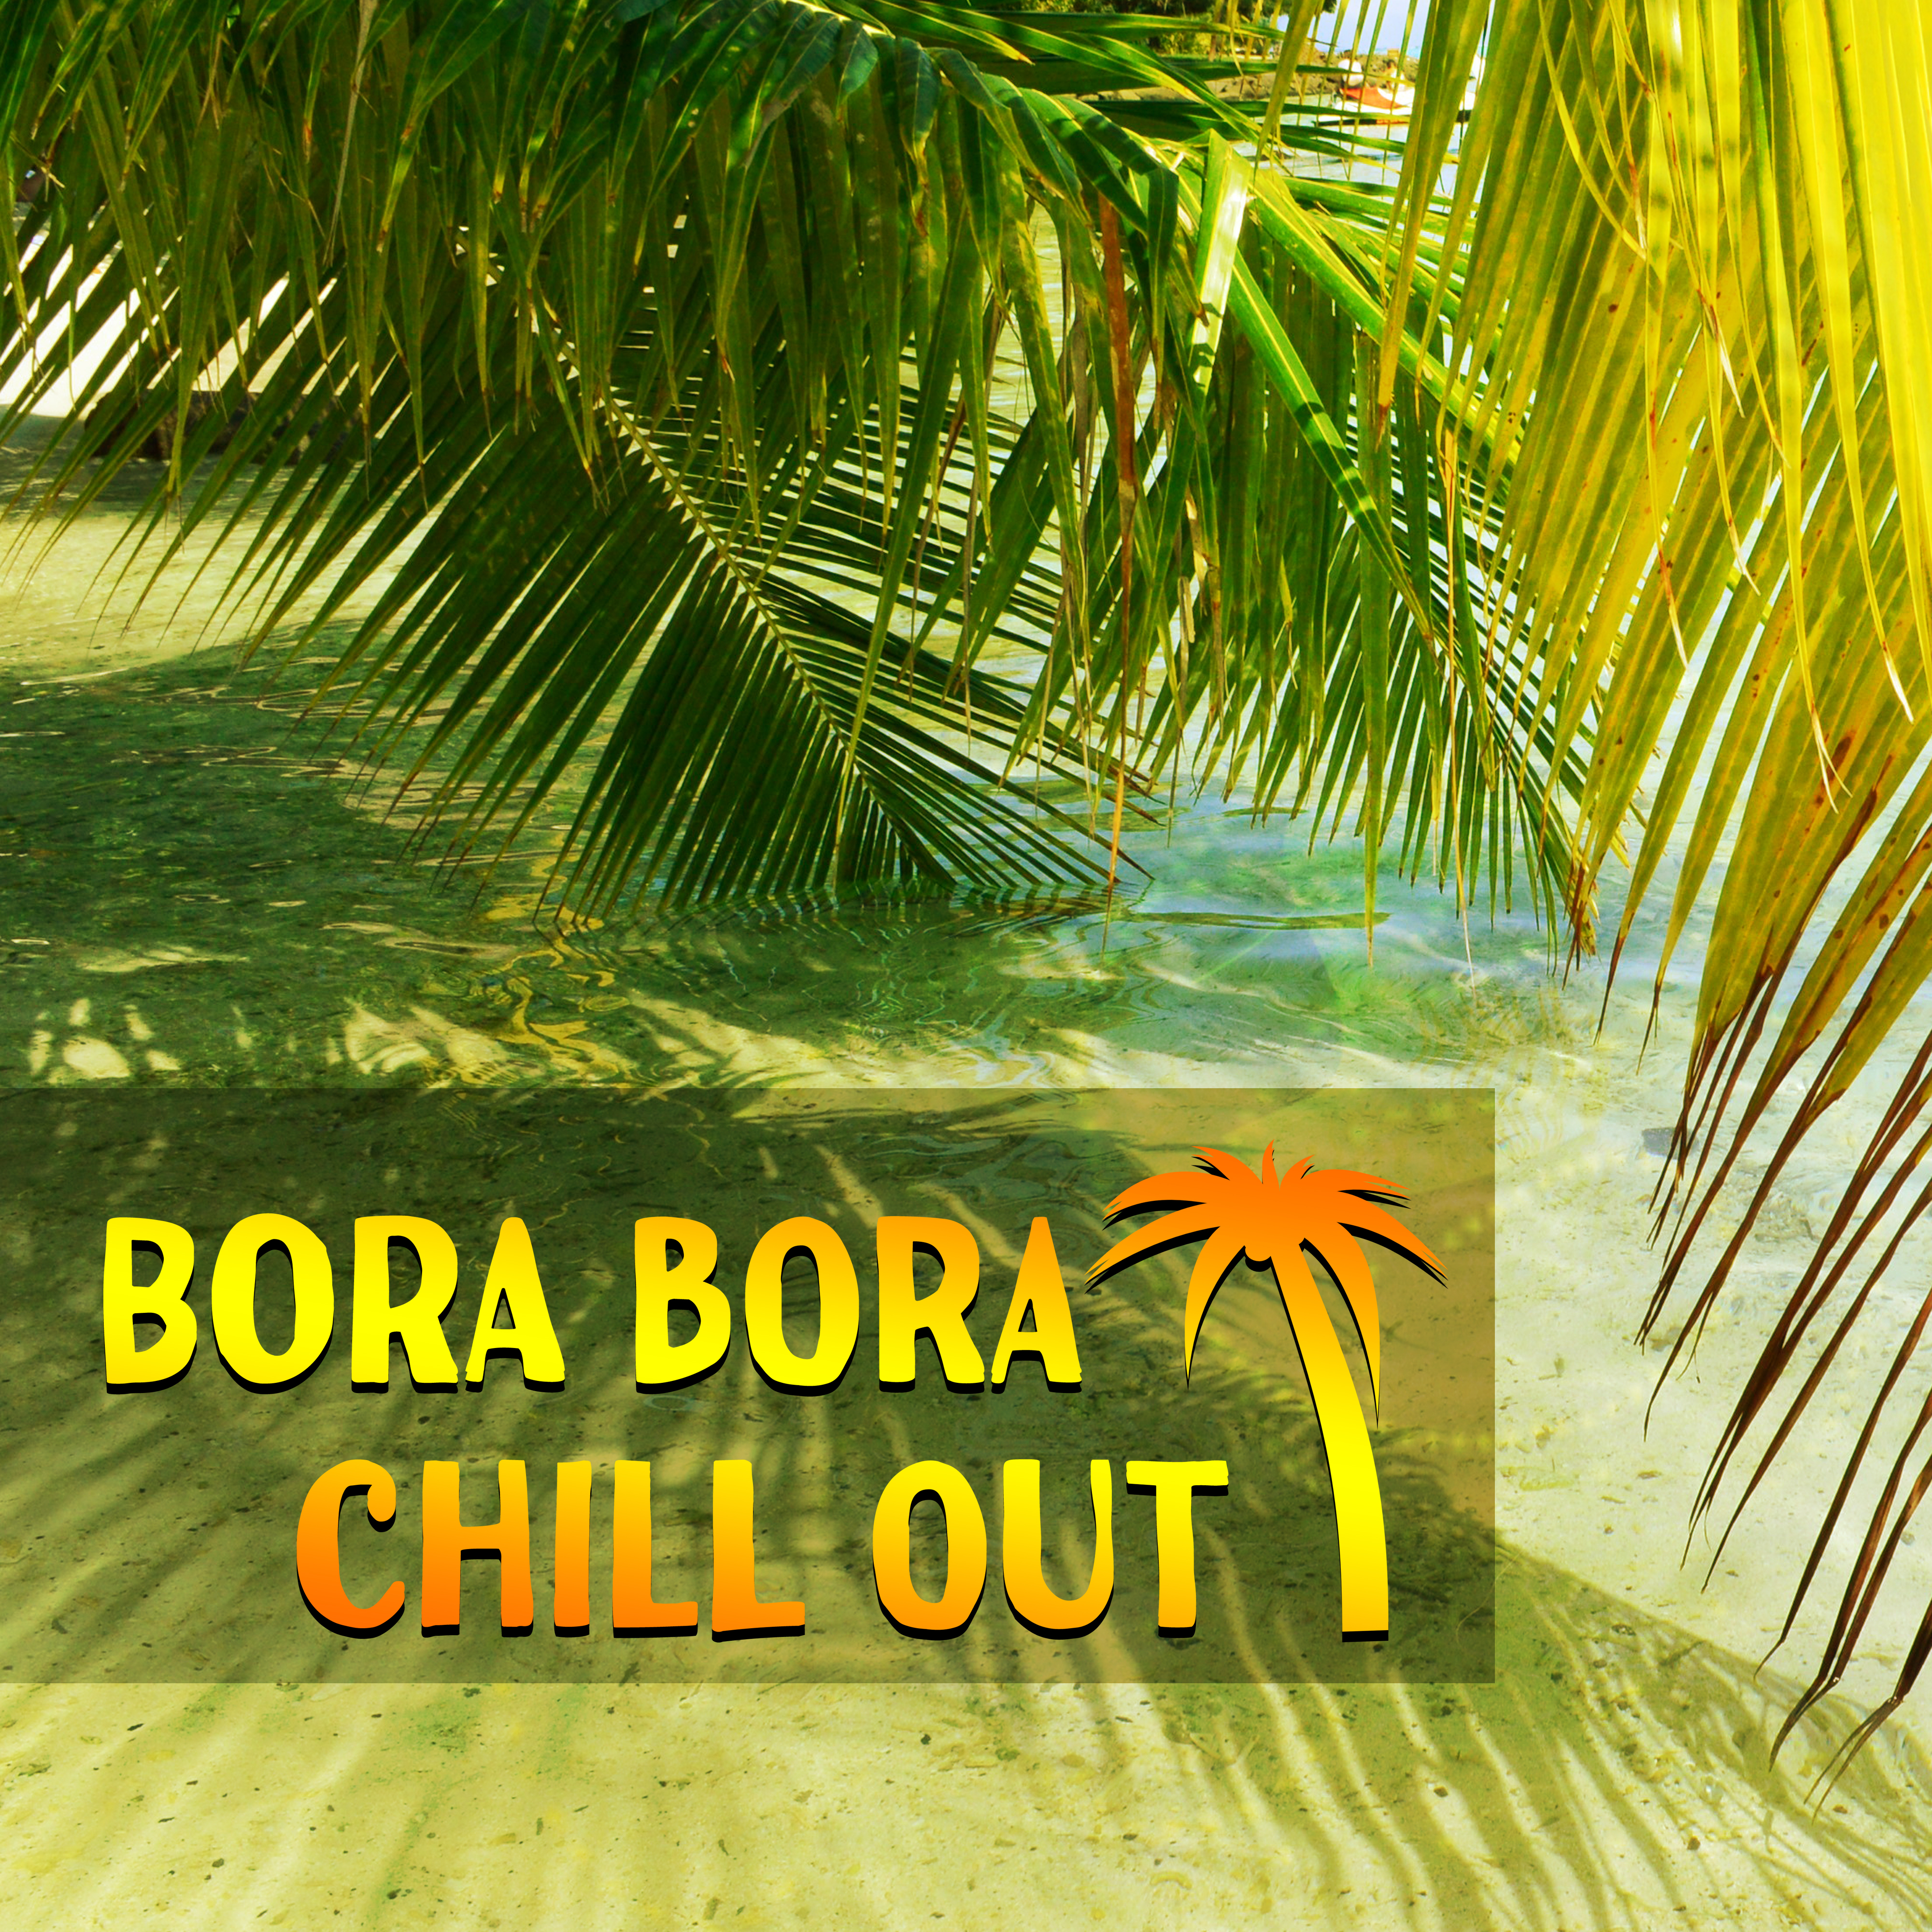 Bora Bora Chill Out – Summer Music, Chill Out, Relax, Holiday Dreams, Deep Relaxation